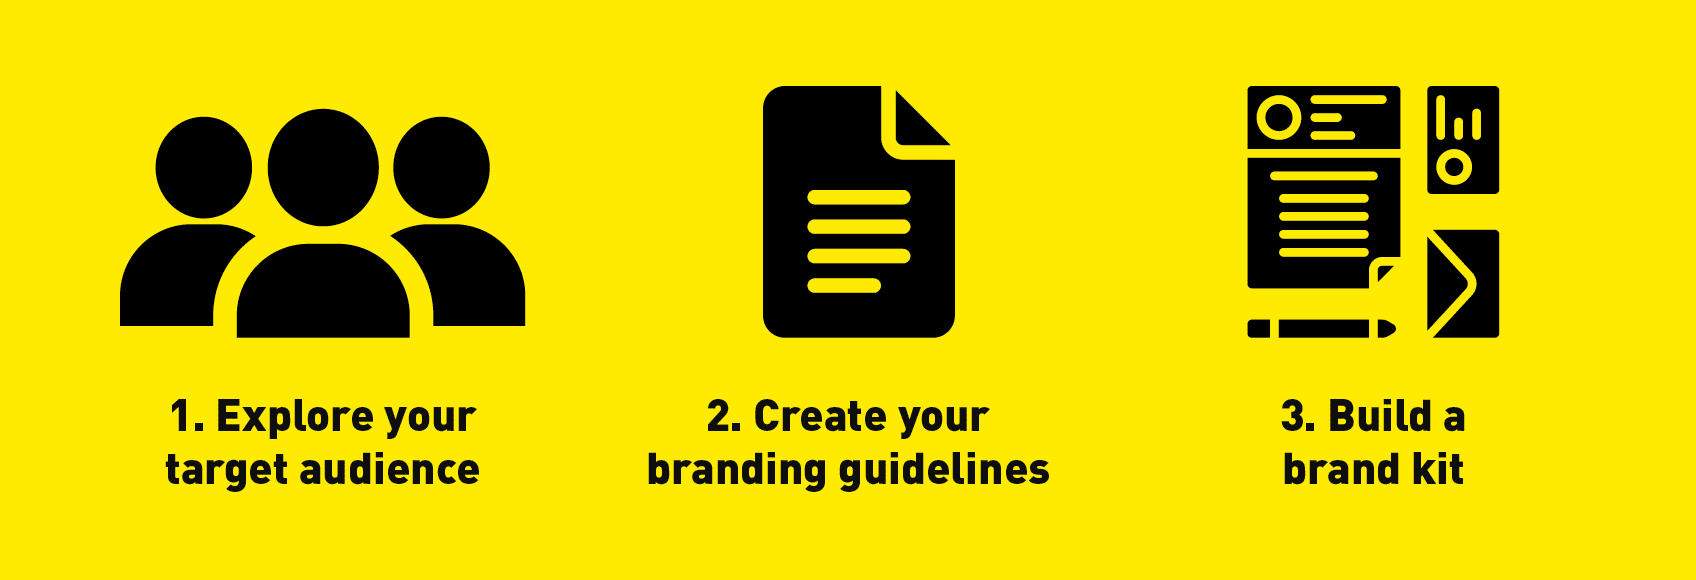 This image lists the three steps to creating a nonprofit branding strategy, which is discussed in more detail in the text below.